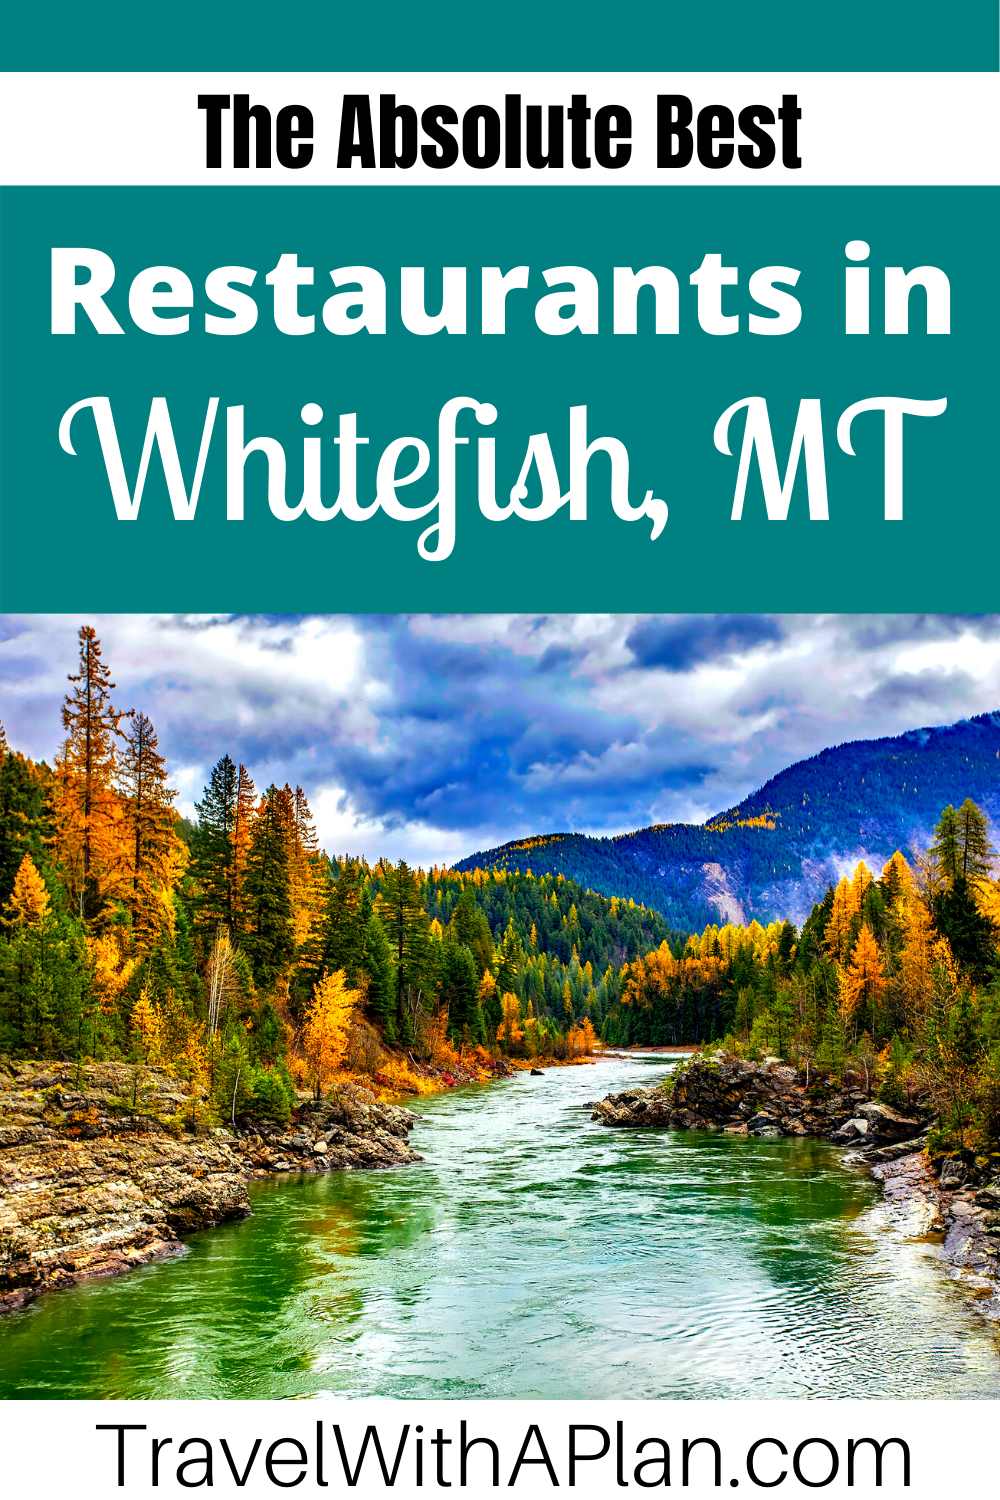 Find out the absolute best restaurants in Whitefish, Montana from top US family travel blog, Travel With A Plan!